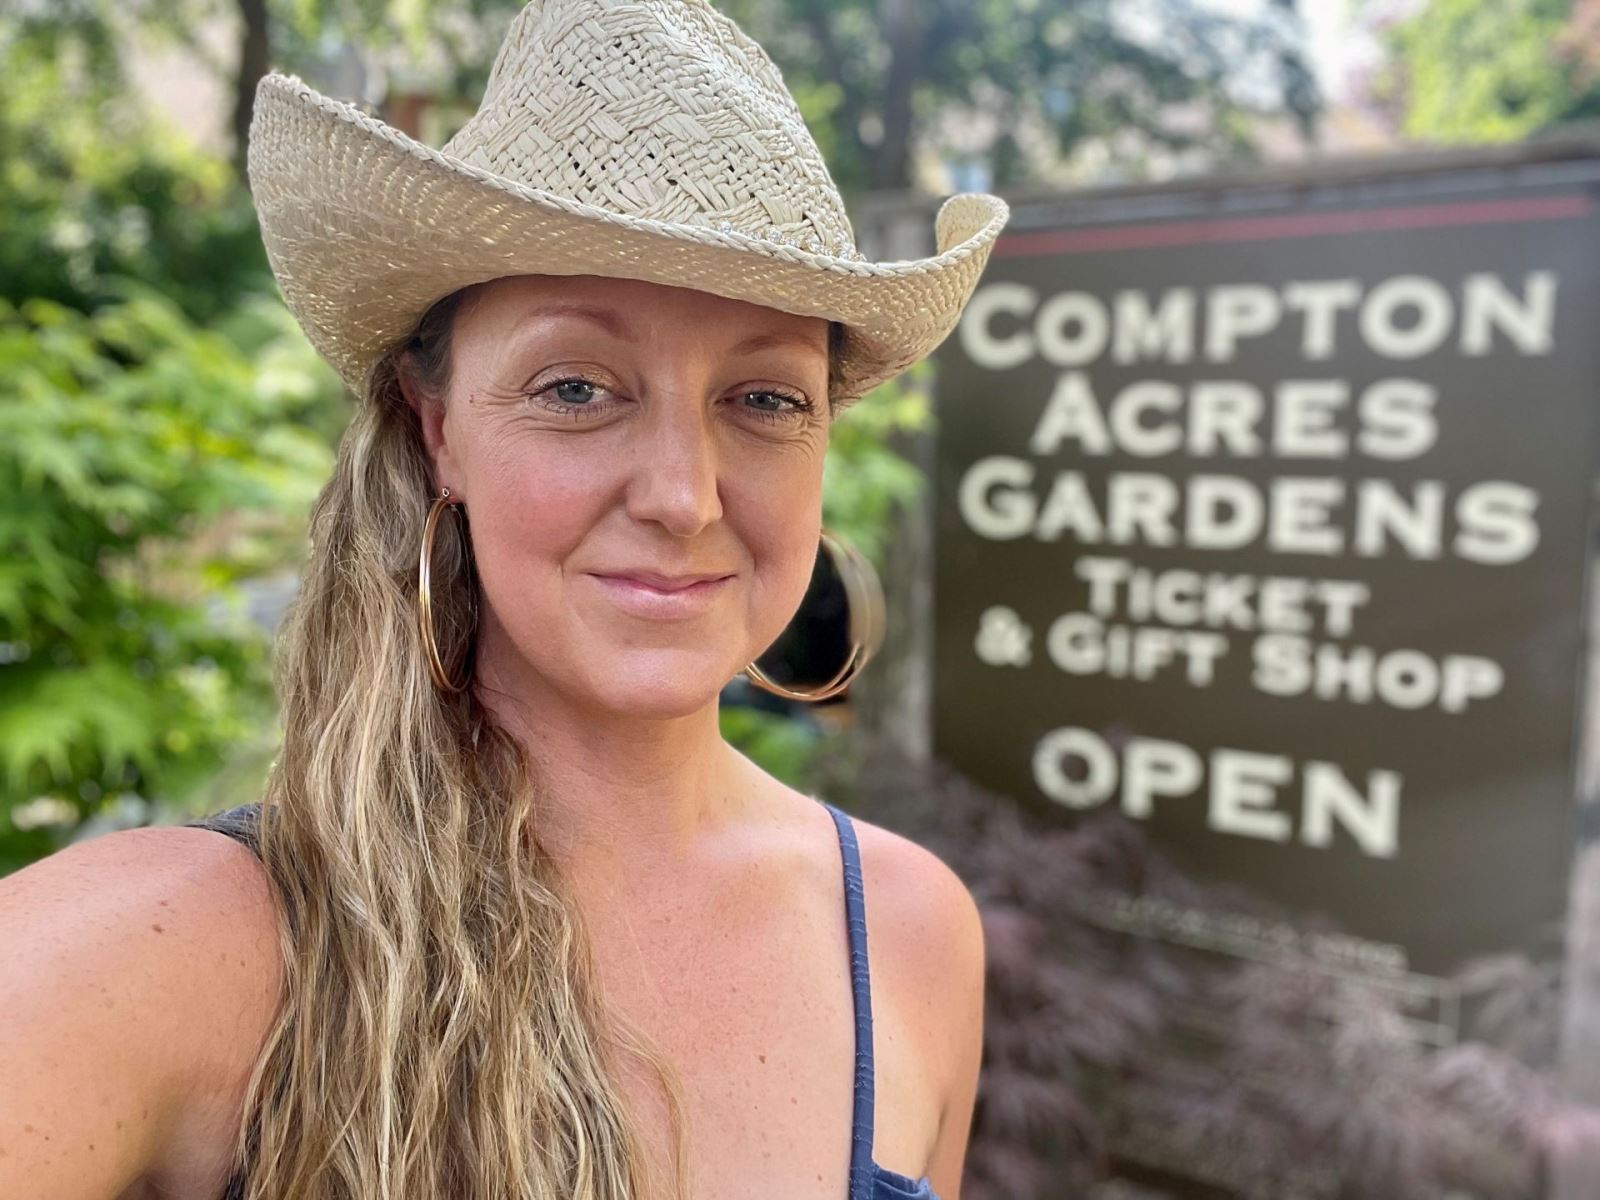 Grace standing in front of Compton Acres entrance sign 